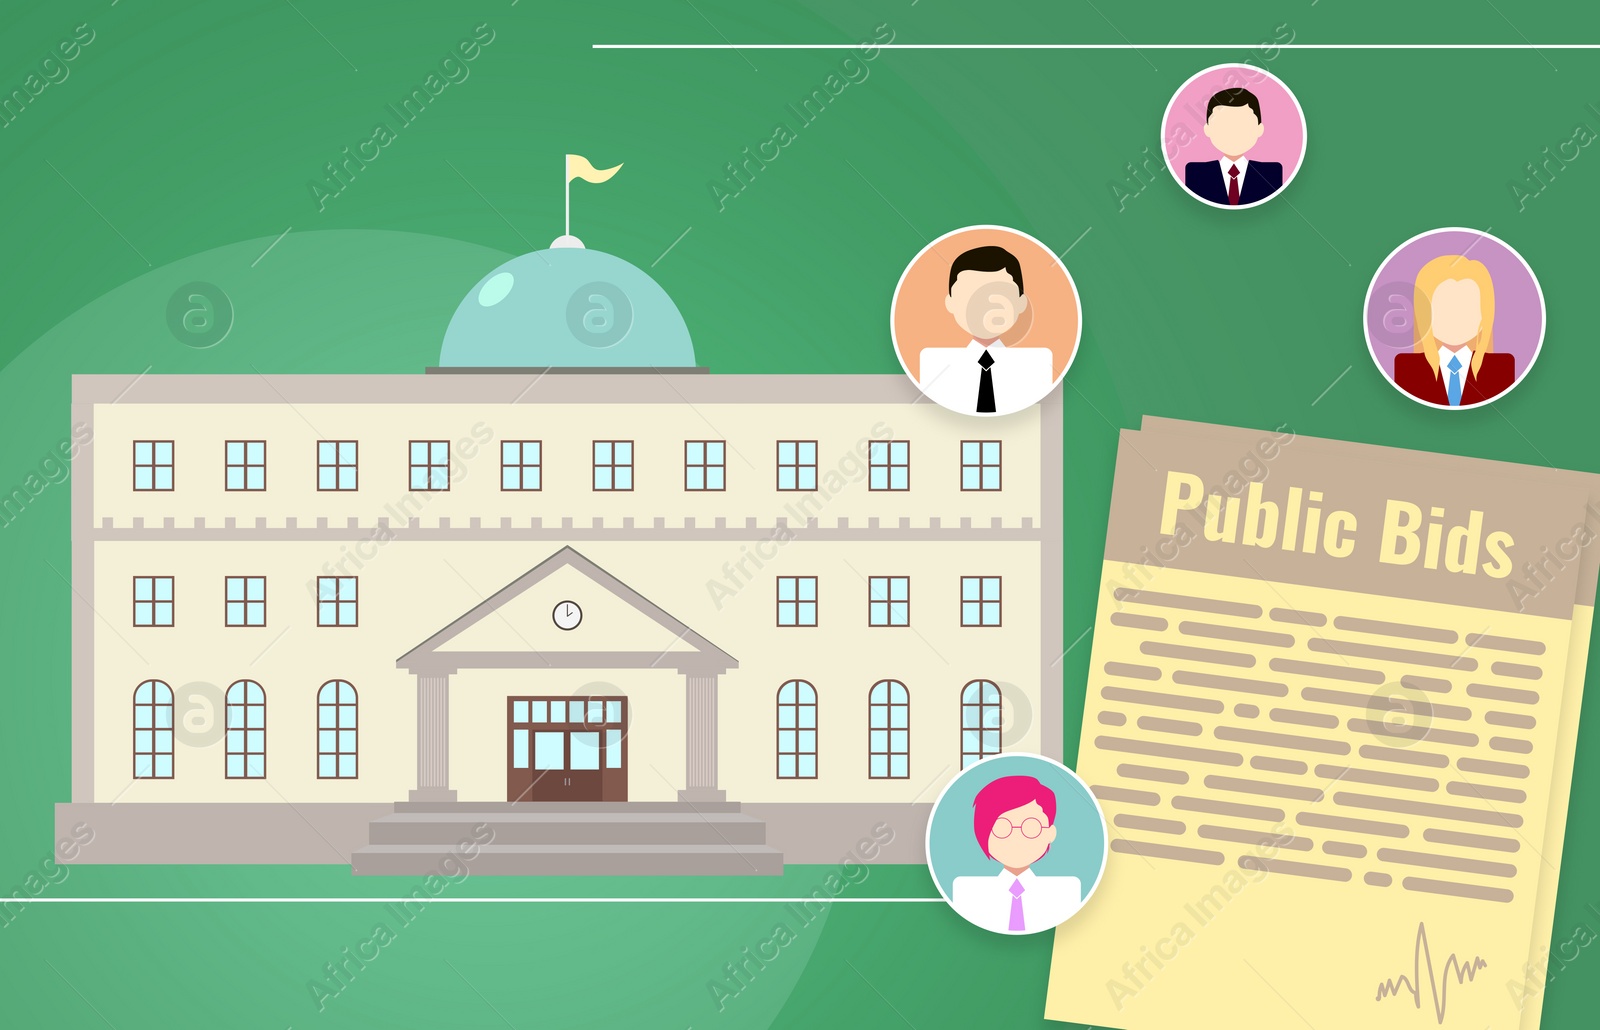 Illustration of Government procurement. Municipal building, Public Bids documents and icons on green background, illustration